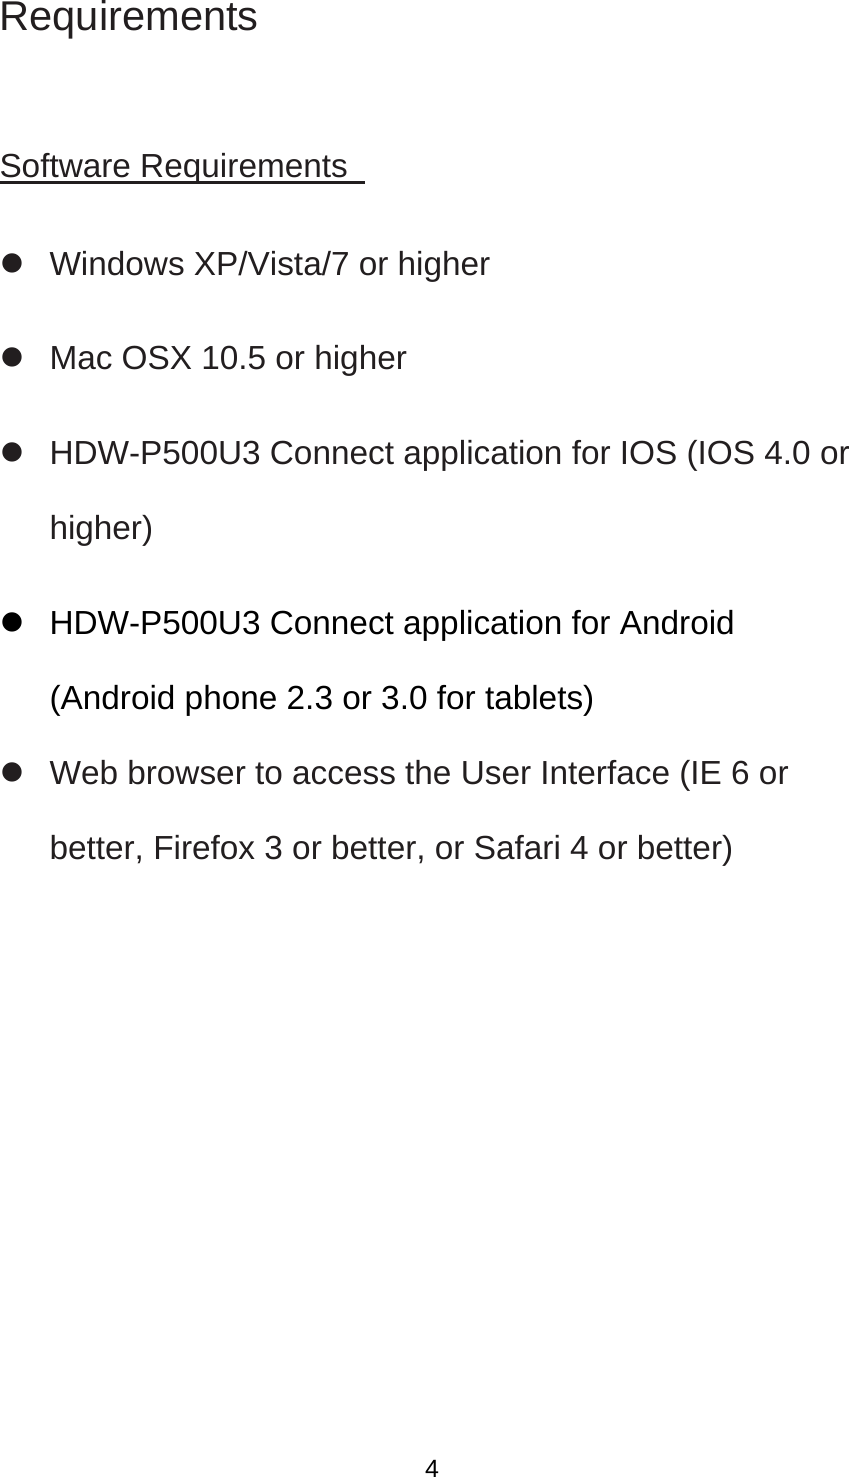 Requirements  Software Requirements     Windows XP/Vista/7 or higher     Mac OSX 10.5 or higher     HDW-P500U3 Connect application for IOS (IOS 4.0 or higher)    HDW-P500U3 Connect application for Android (Android phone 2.3 or 3.0 for tablets)     Web browser to access the User Interface (IE 6 or better, Firefox 3 or better, or Safari 4 or better)  4